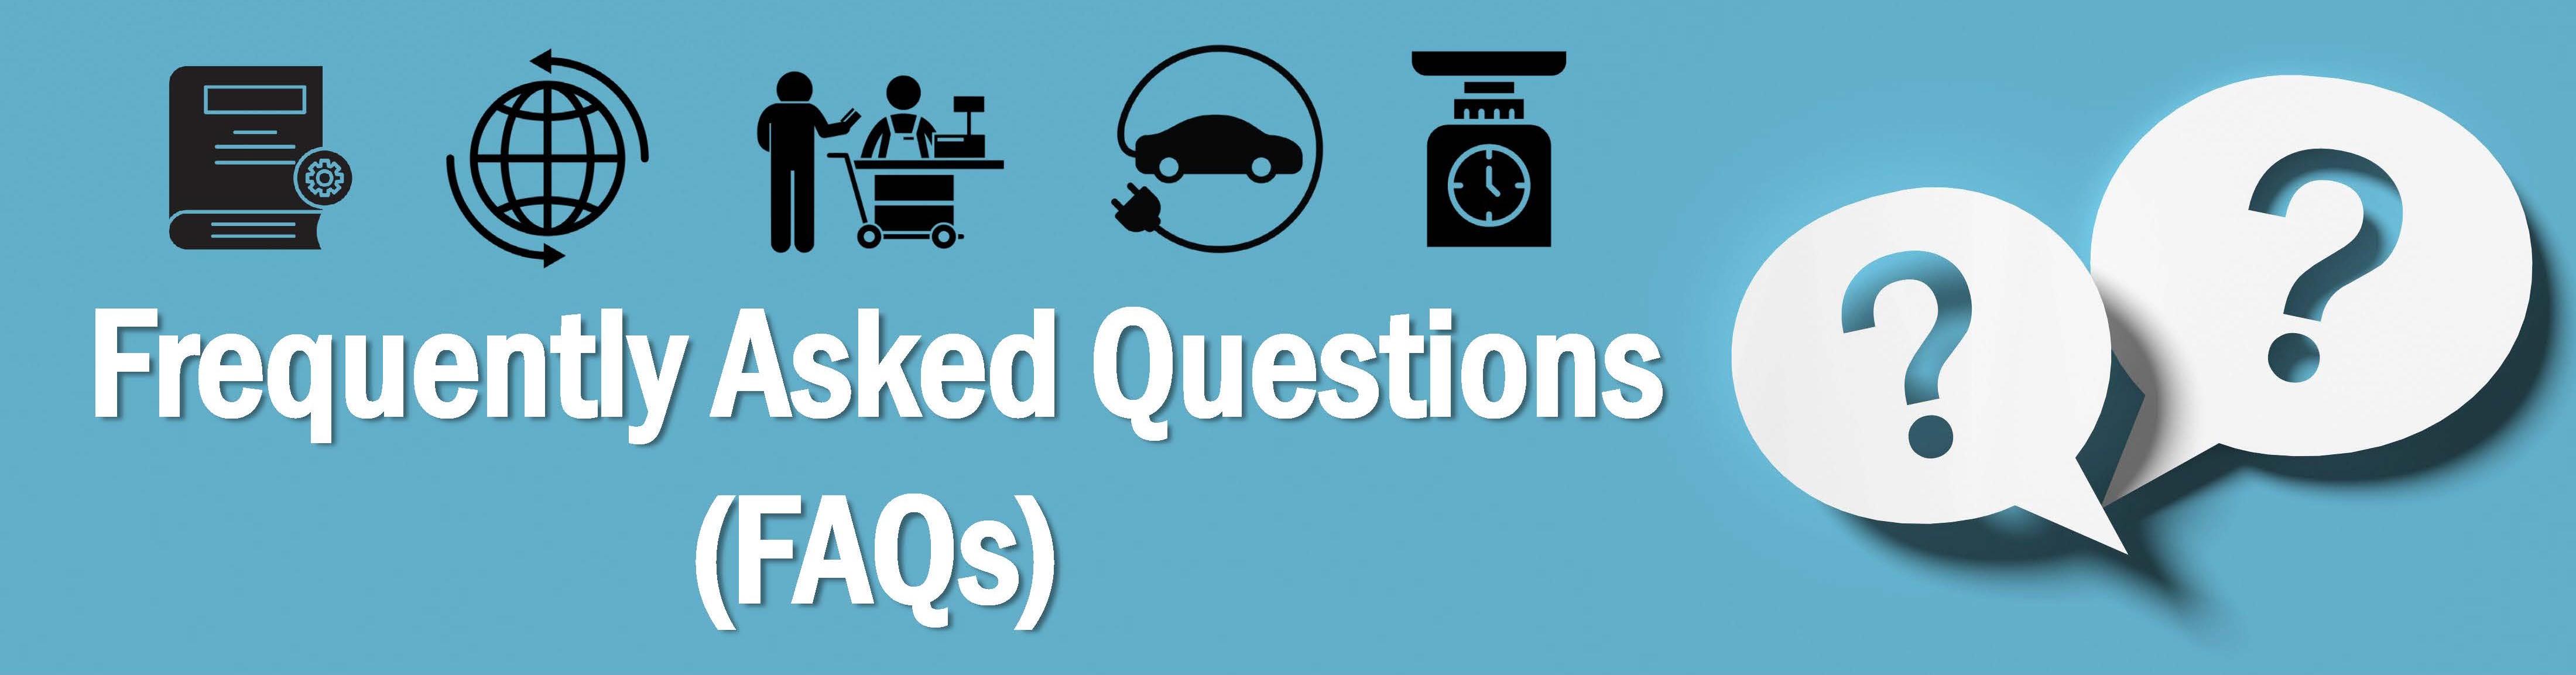 Frequently Asked Questions banner with 5 icons